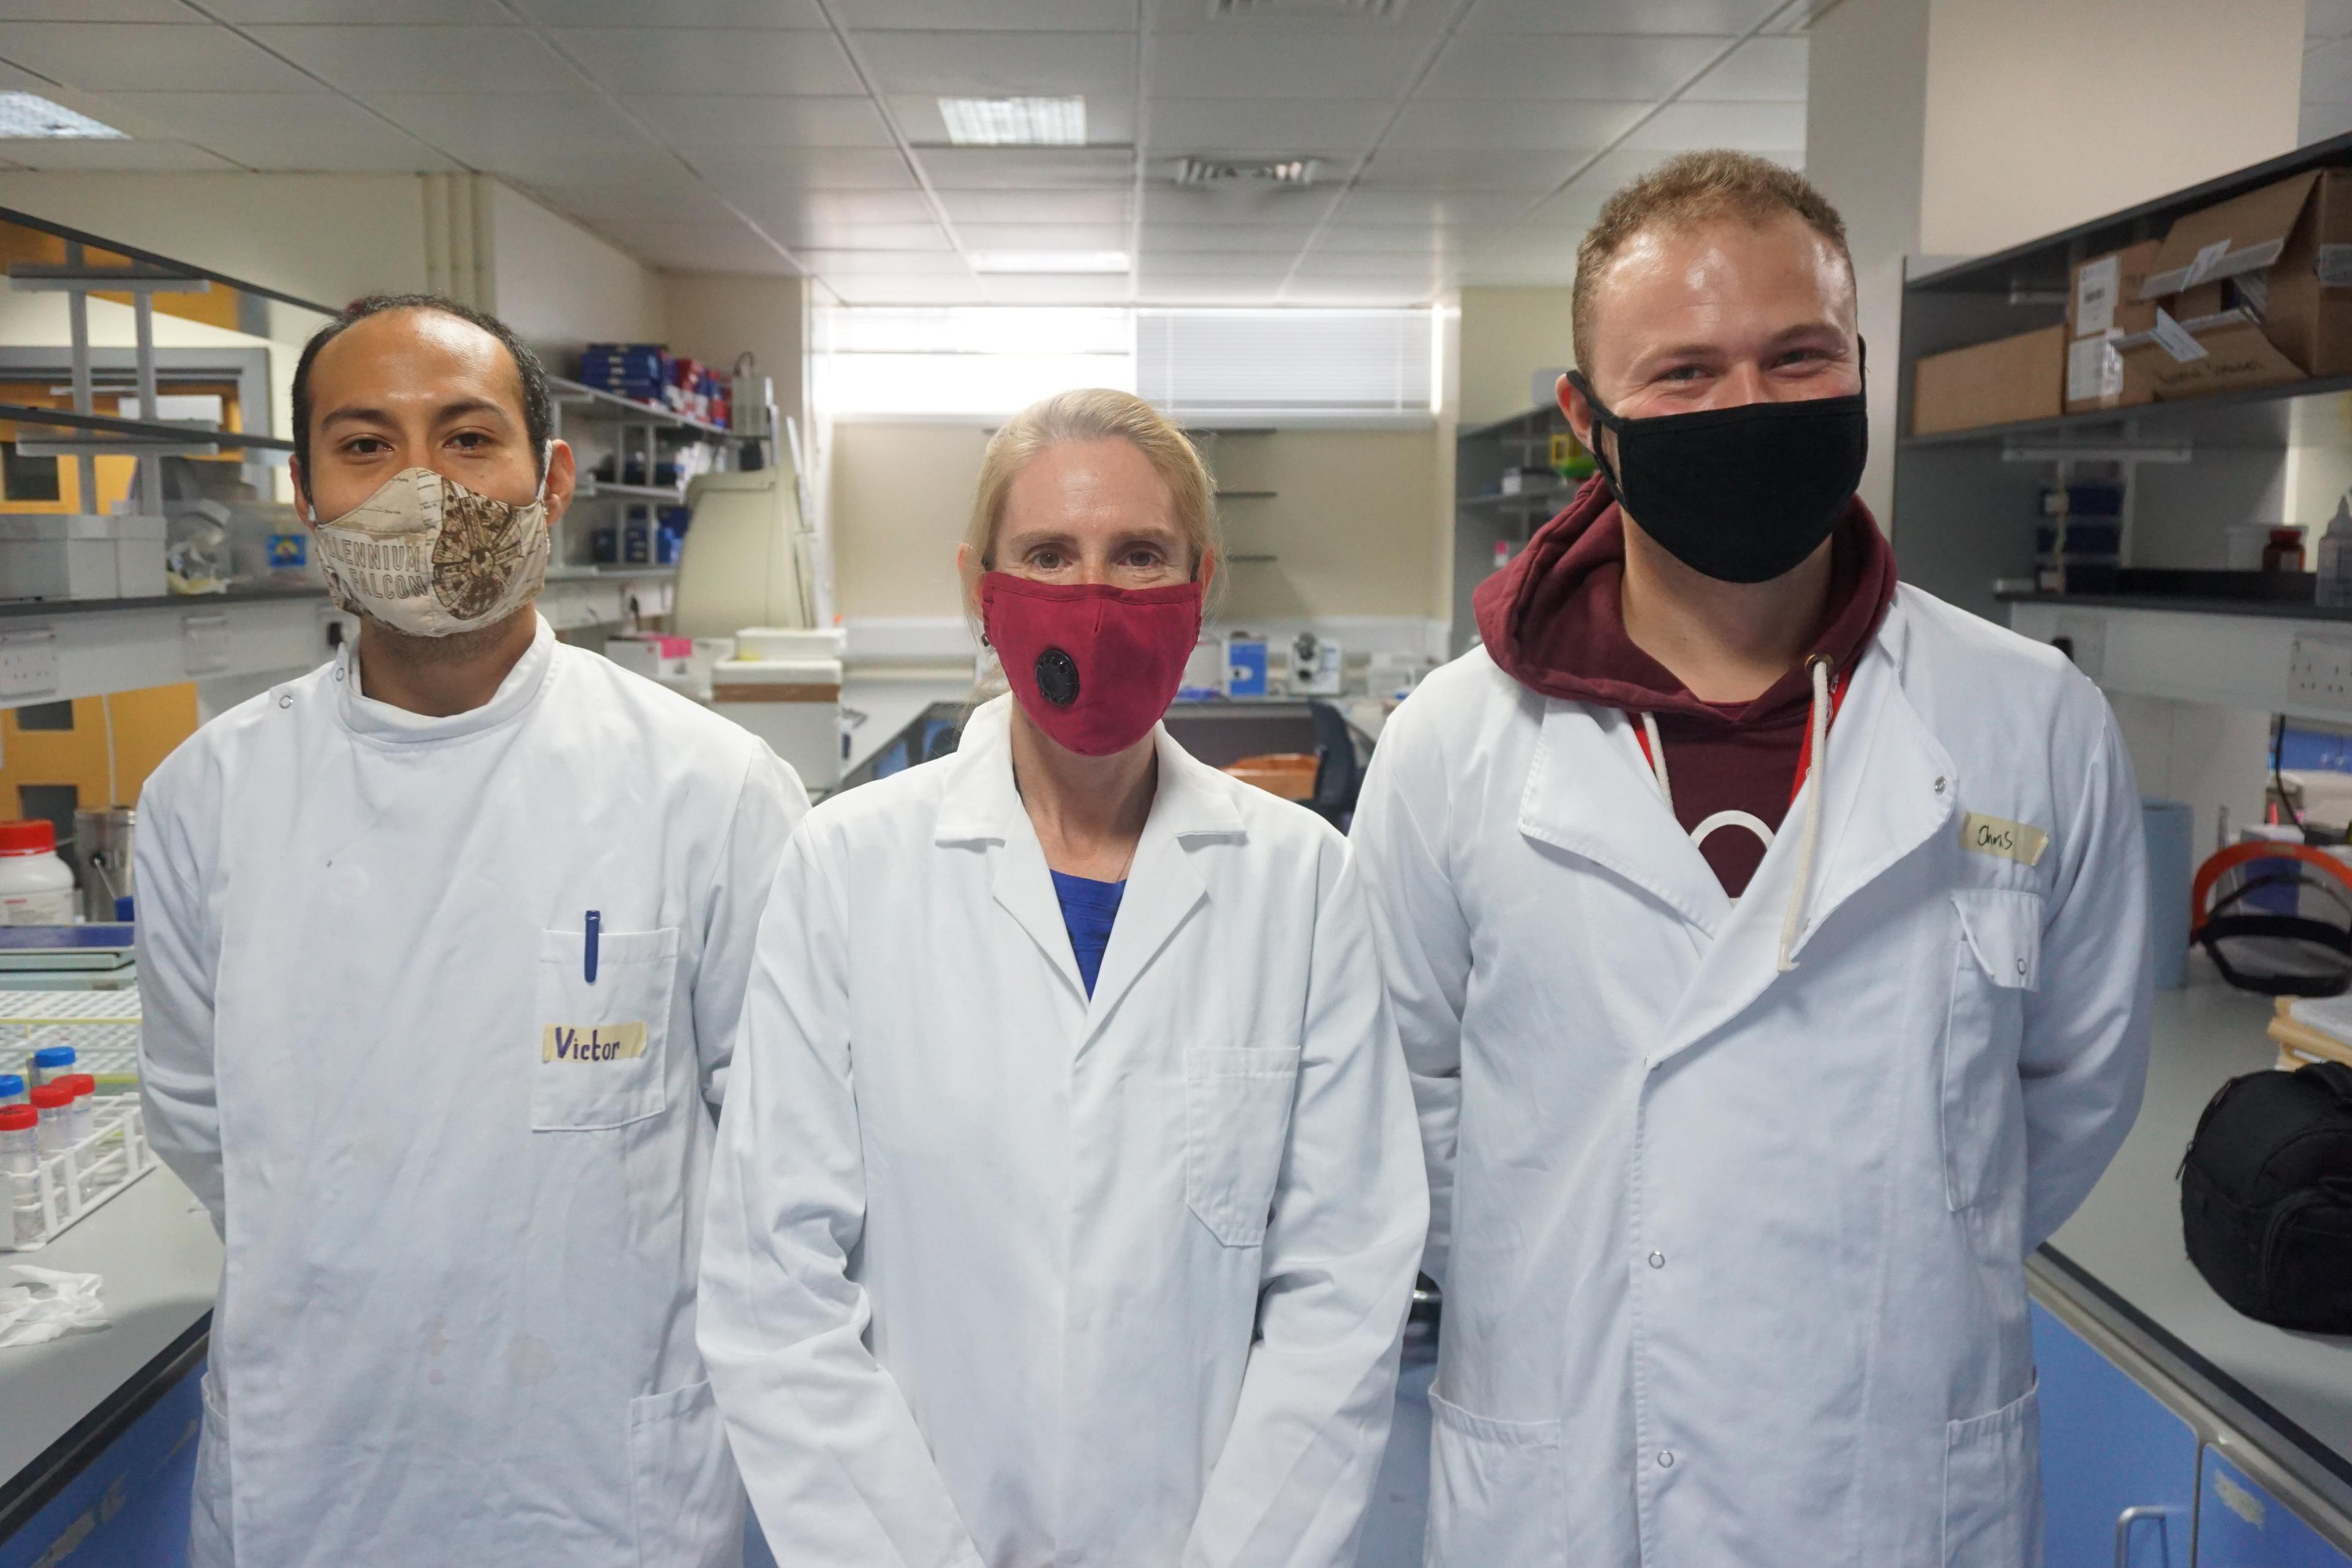 3 scientists wearing face masks and white lab coats are shown standing in a laboratory